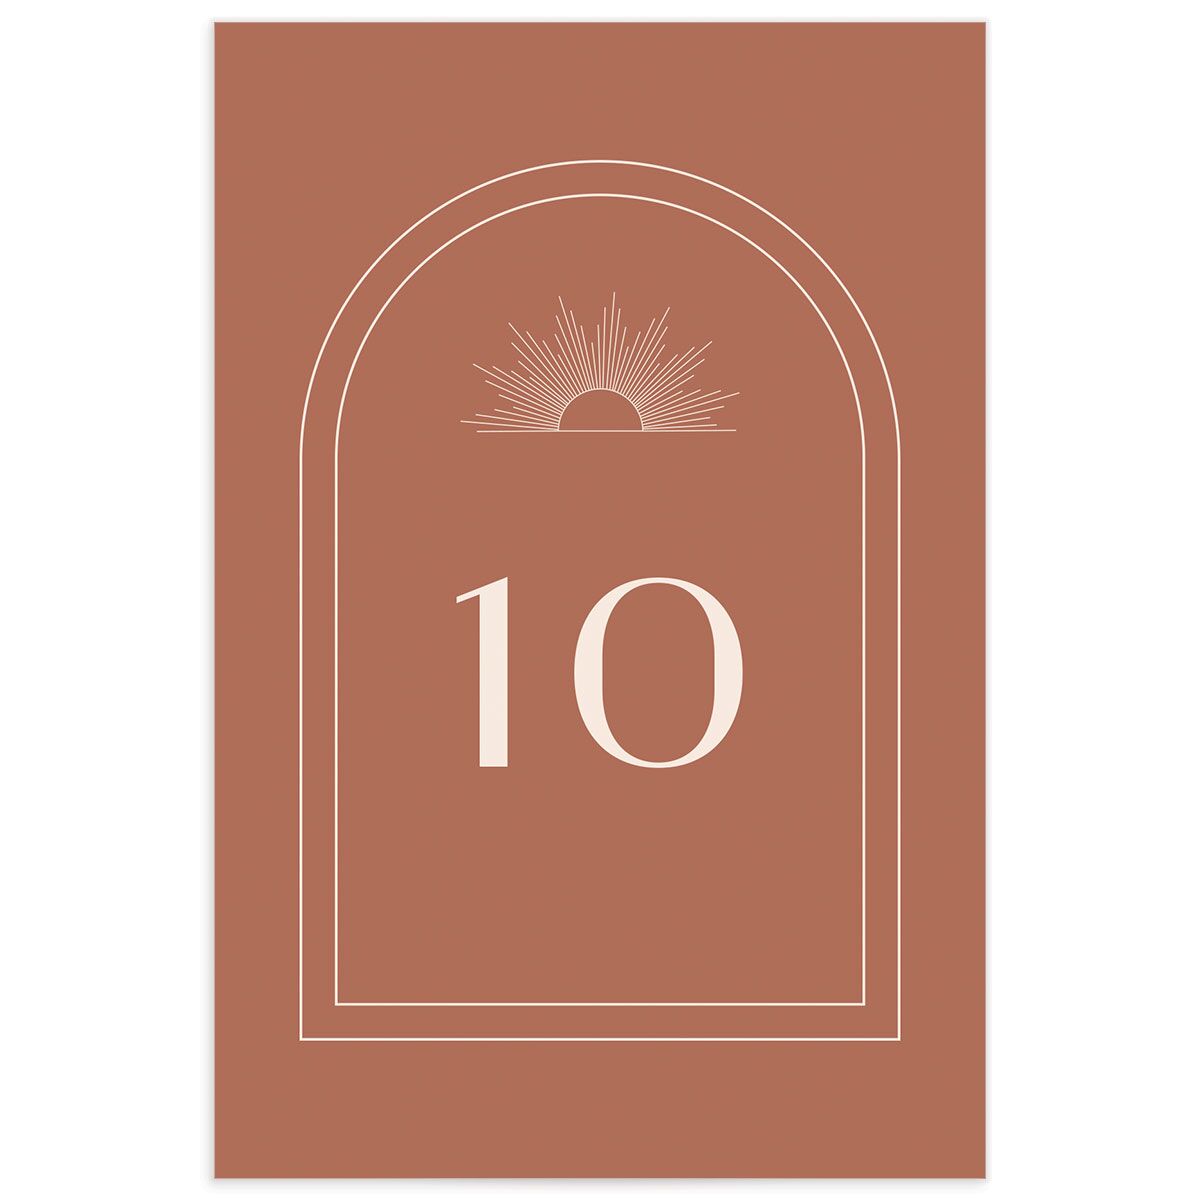 Art Deco Accents Table Numbers back in brown